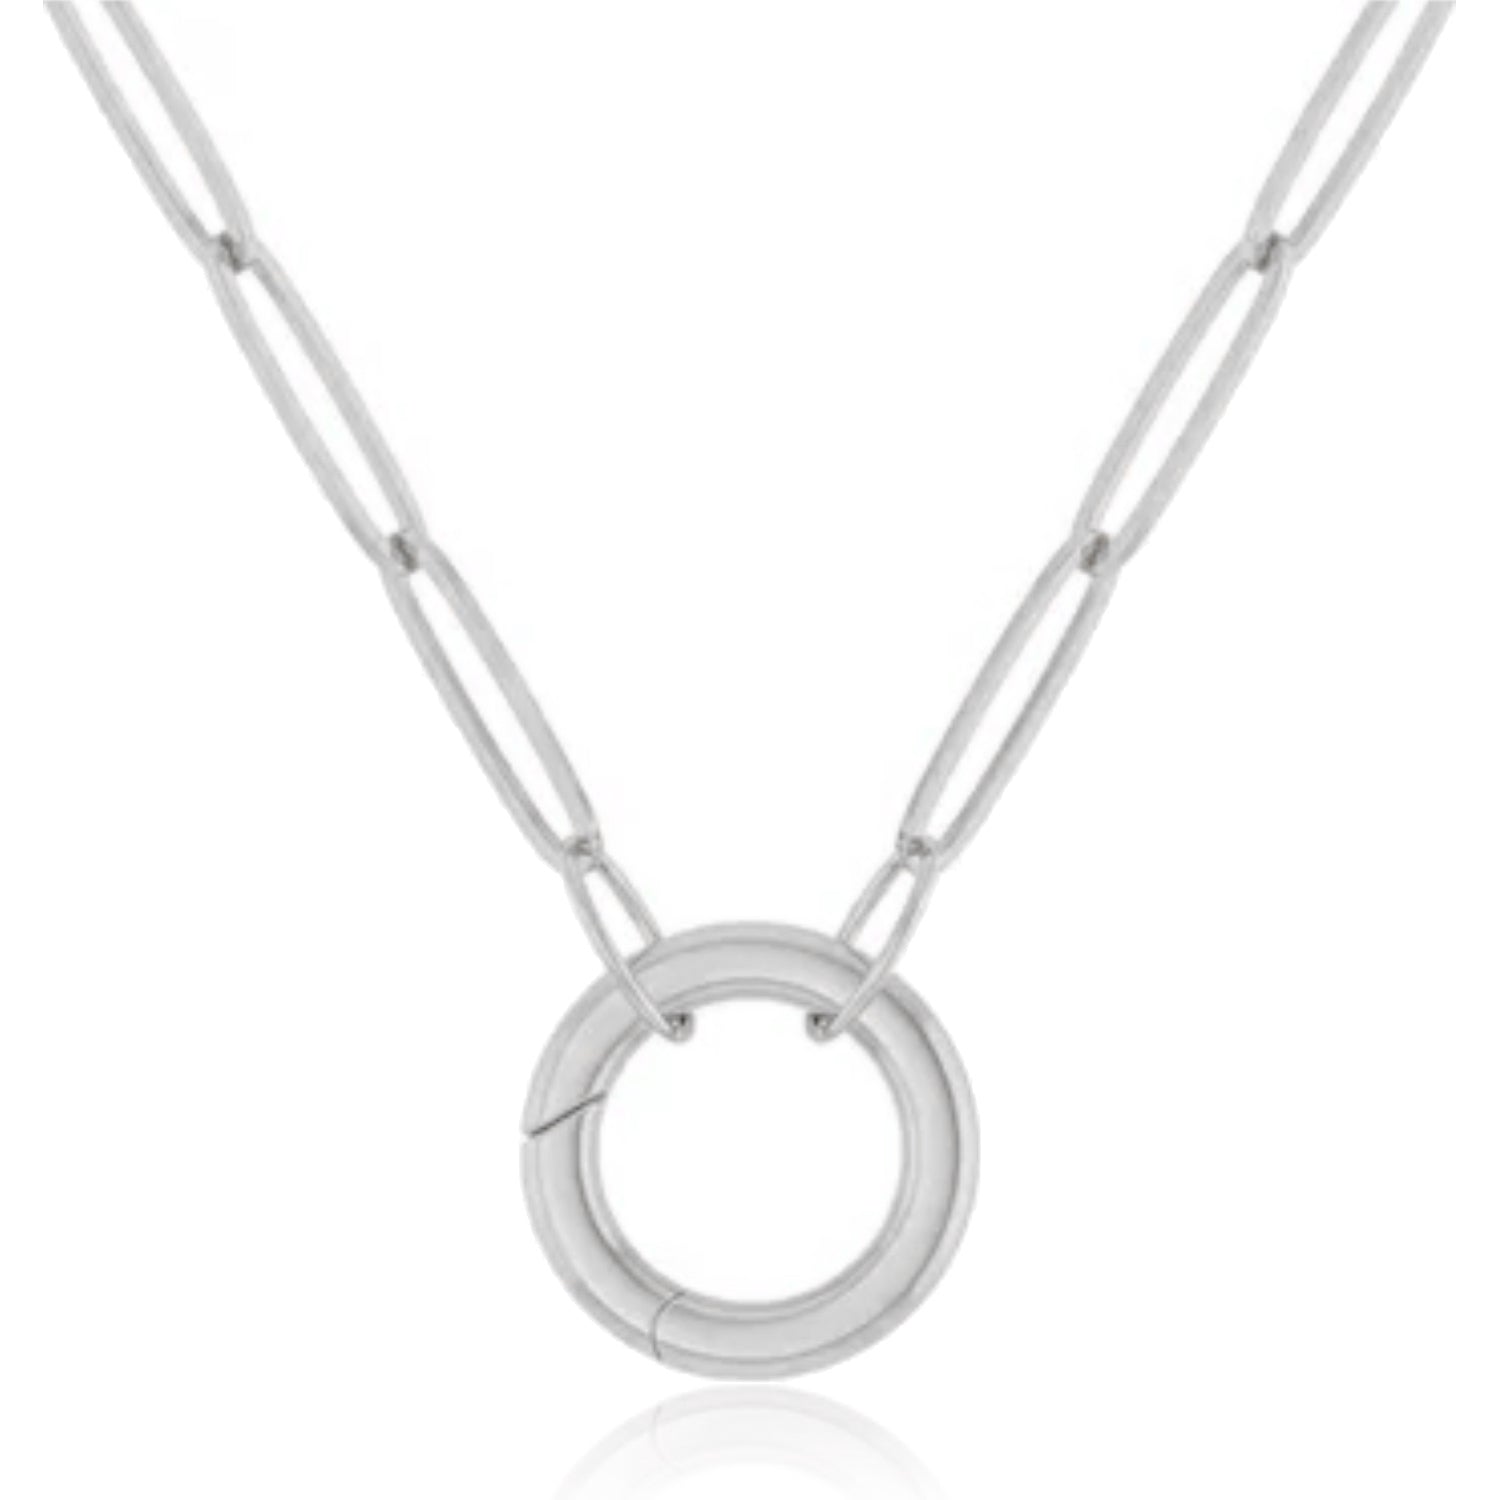 Enhancer Charm Paperclip Link Chain Necklace in White Gold